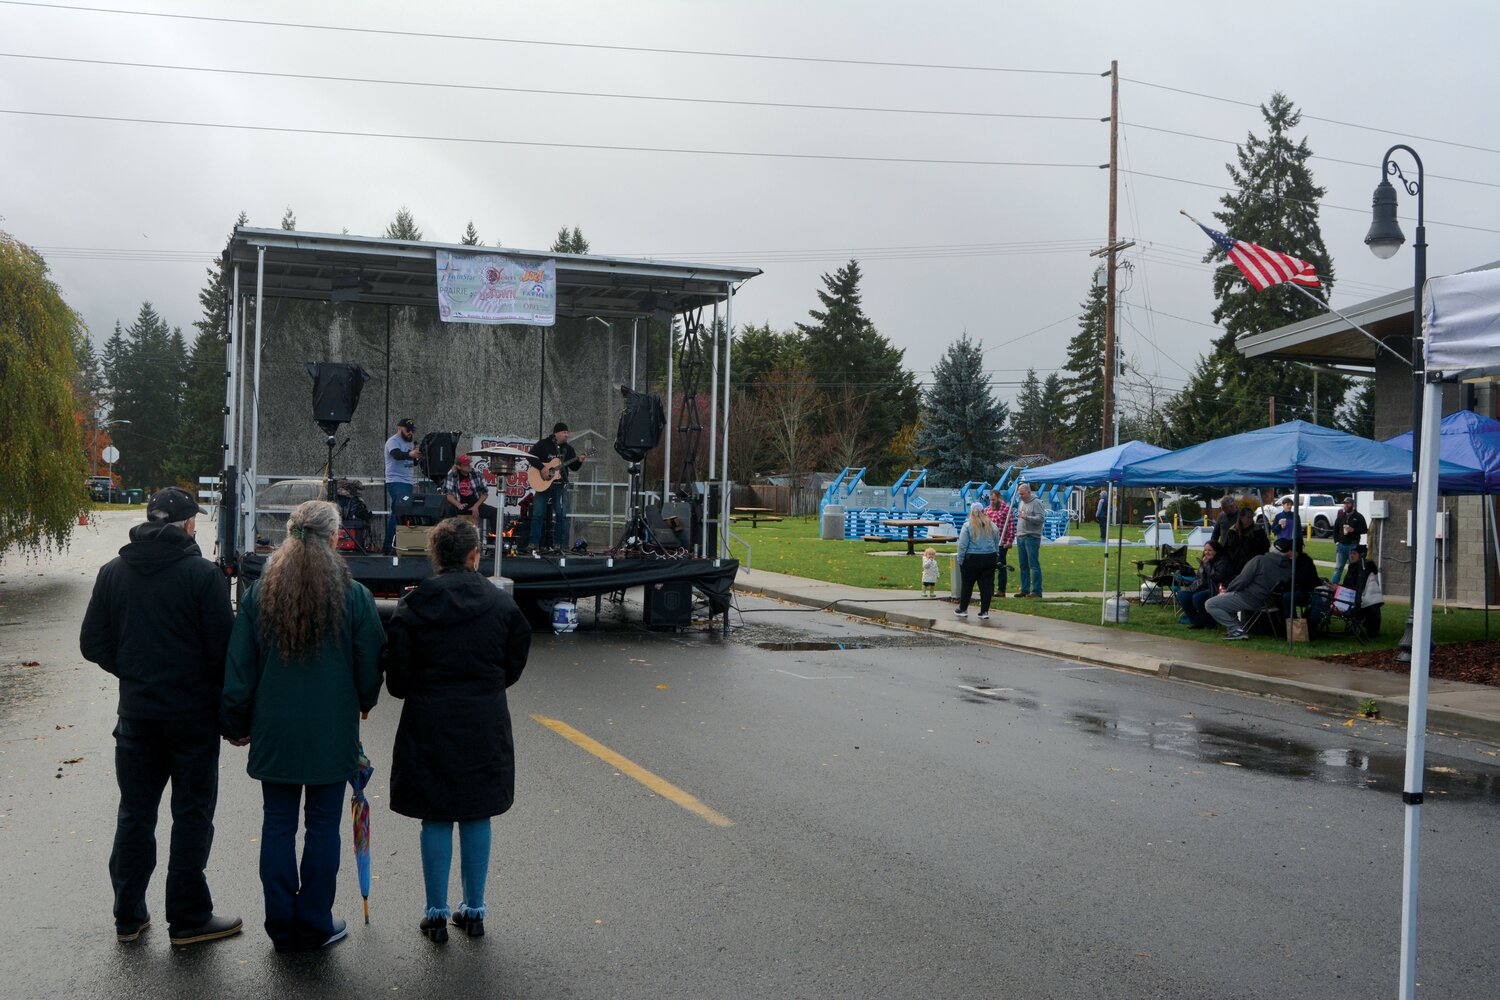 Attendees gather outside of the Yelm Community Center to watch a performance by the Hogue & Moore Band on Nov. 11.